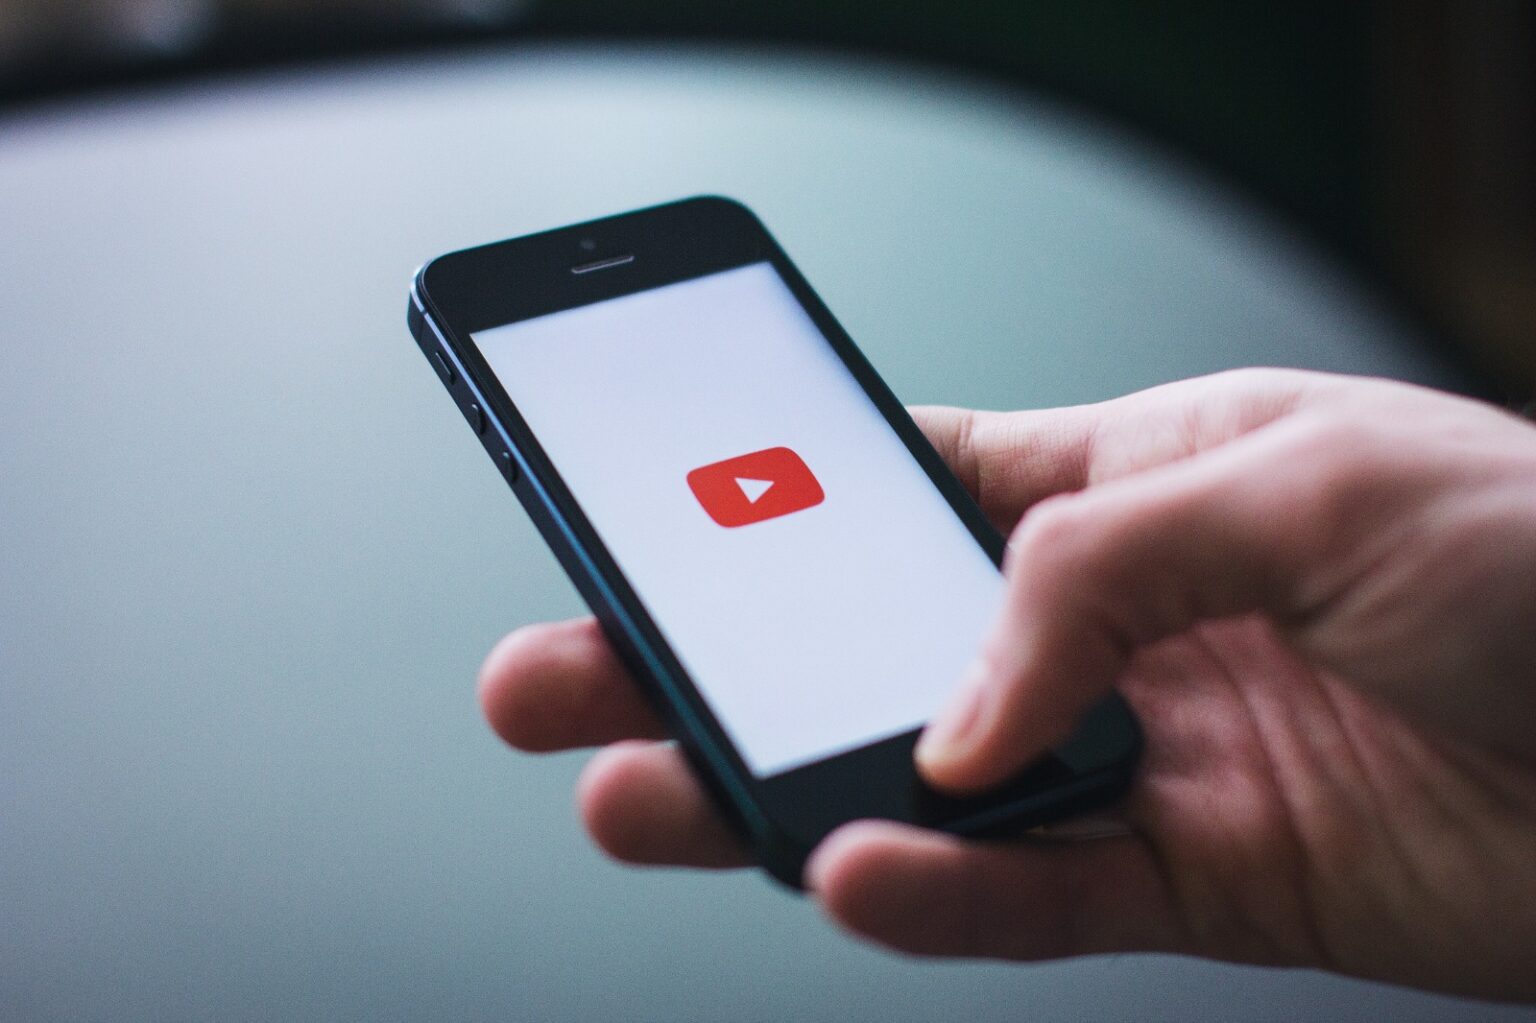 US YOUTUBE USERS SPENDING LESS TIME ON MOBILE